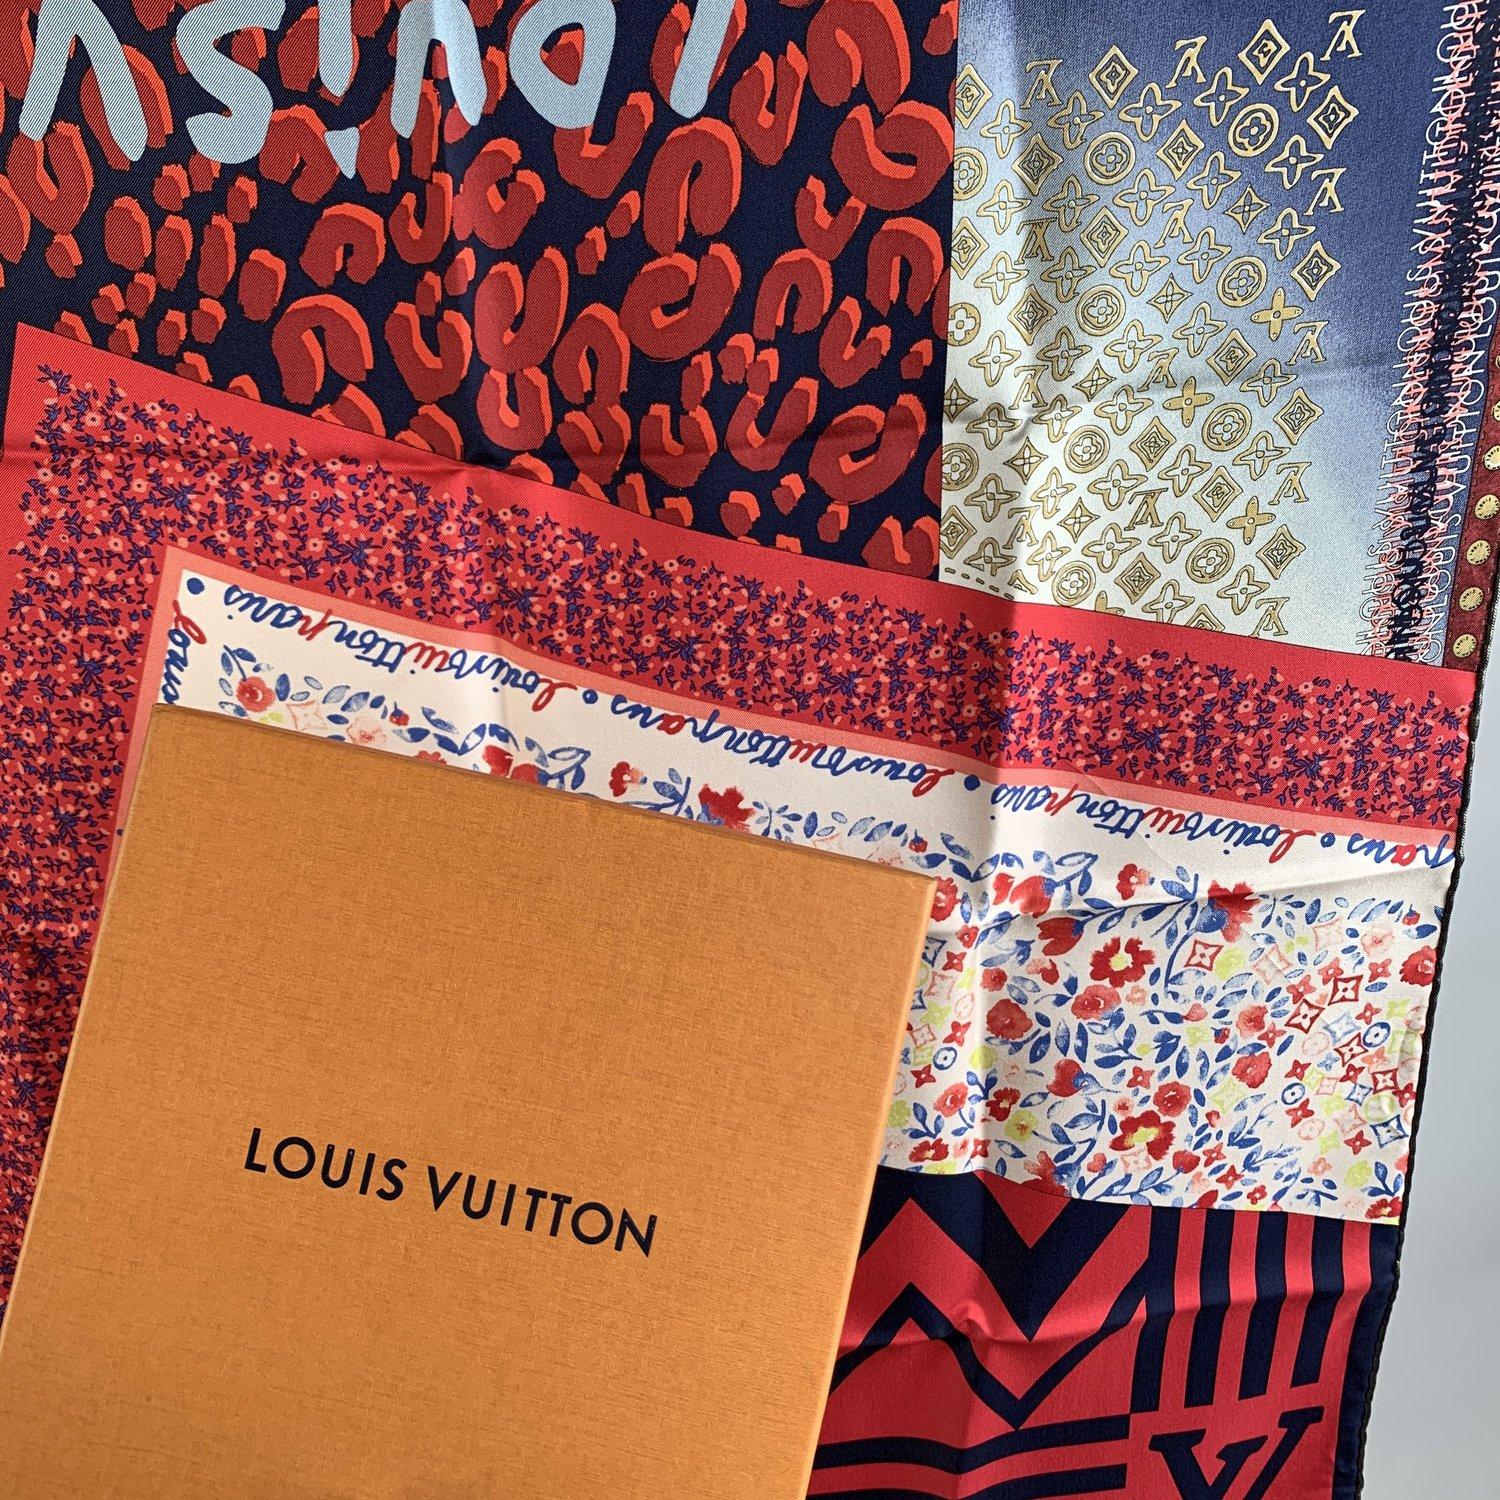 Louis Vuitton silk monogram 'Tresor' Square Scarf in red color. 100% silk. It features a bold patchwork print of scarves including red leopard geometric floral and map monogram. Measurements: 26 x 26 inches - 66 x 66 cm. Estimated retail price was